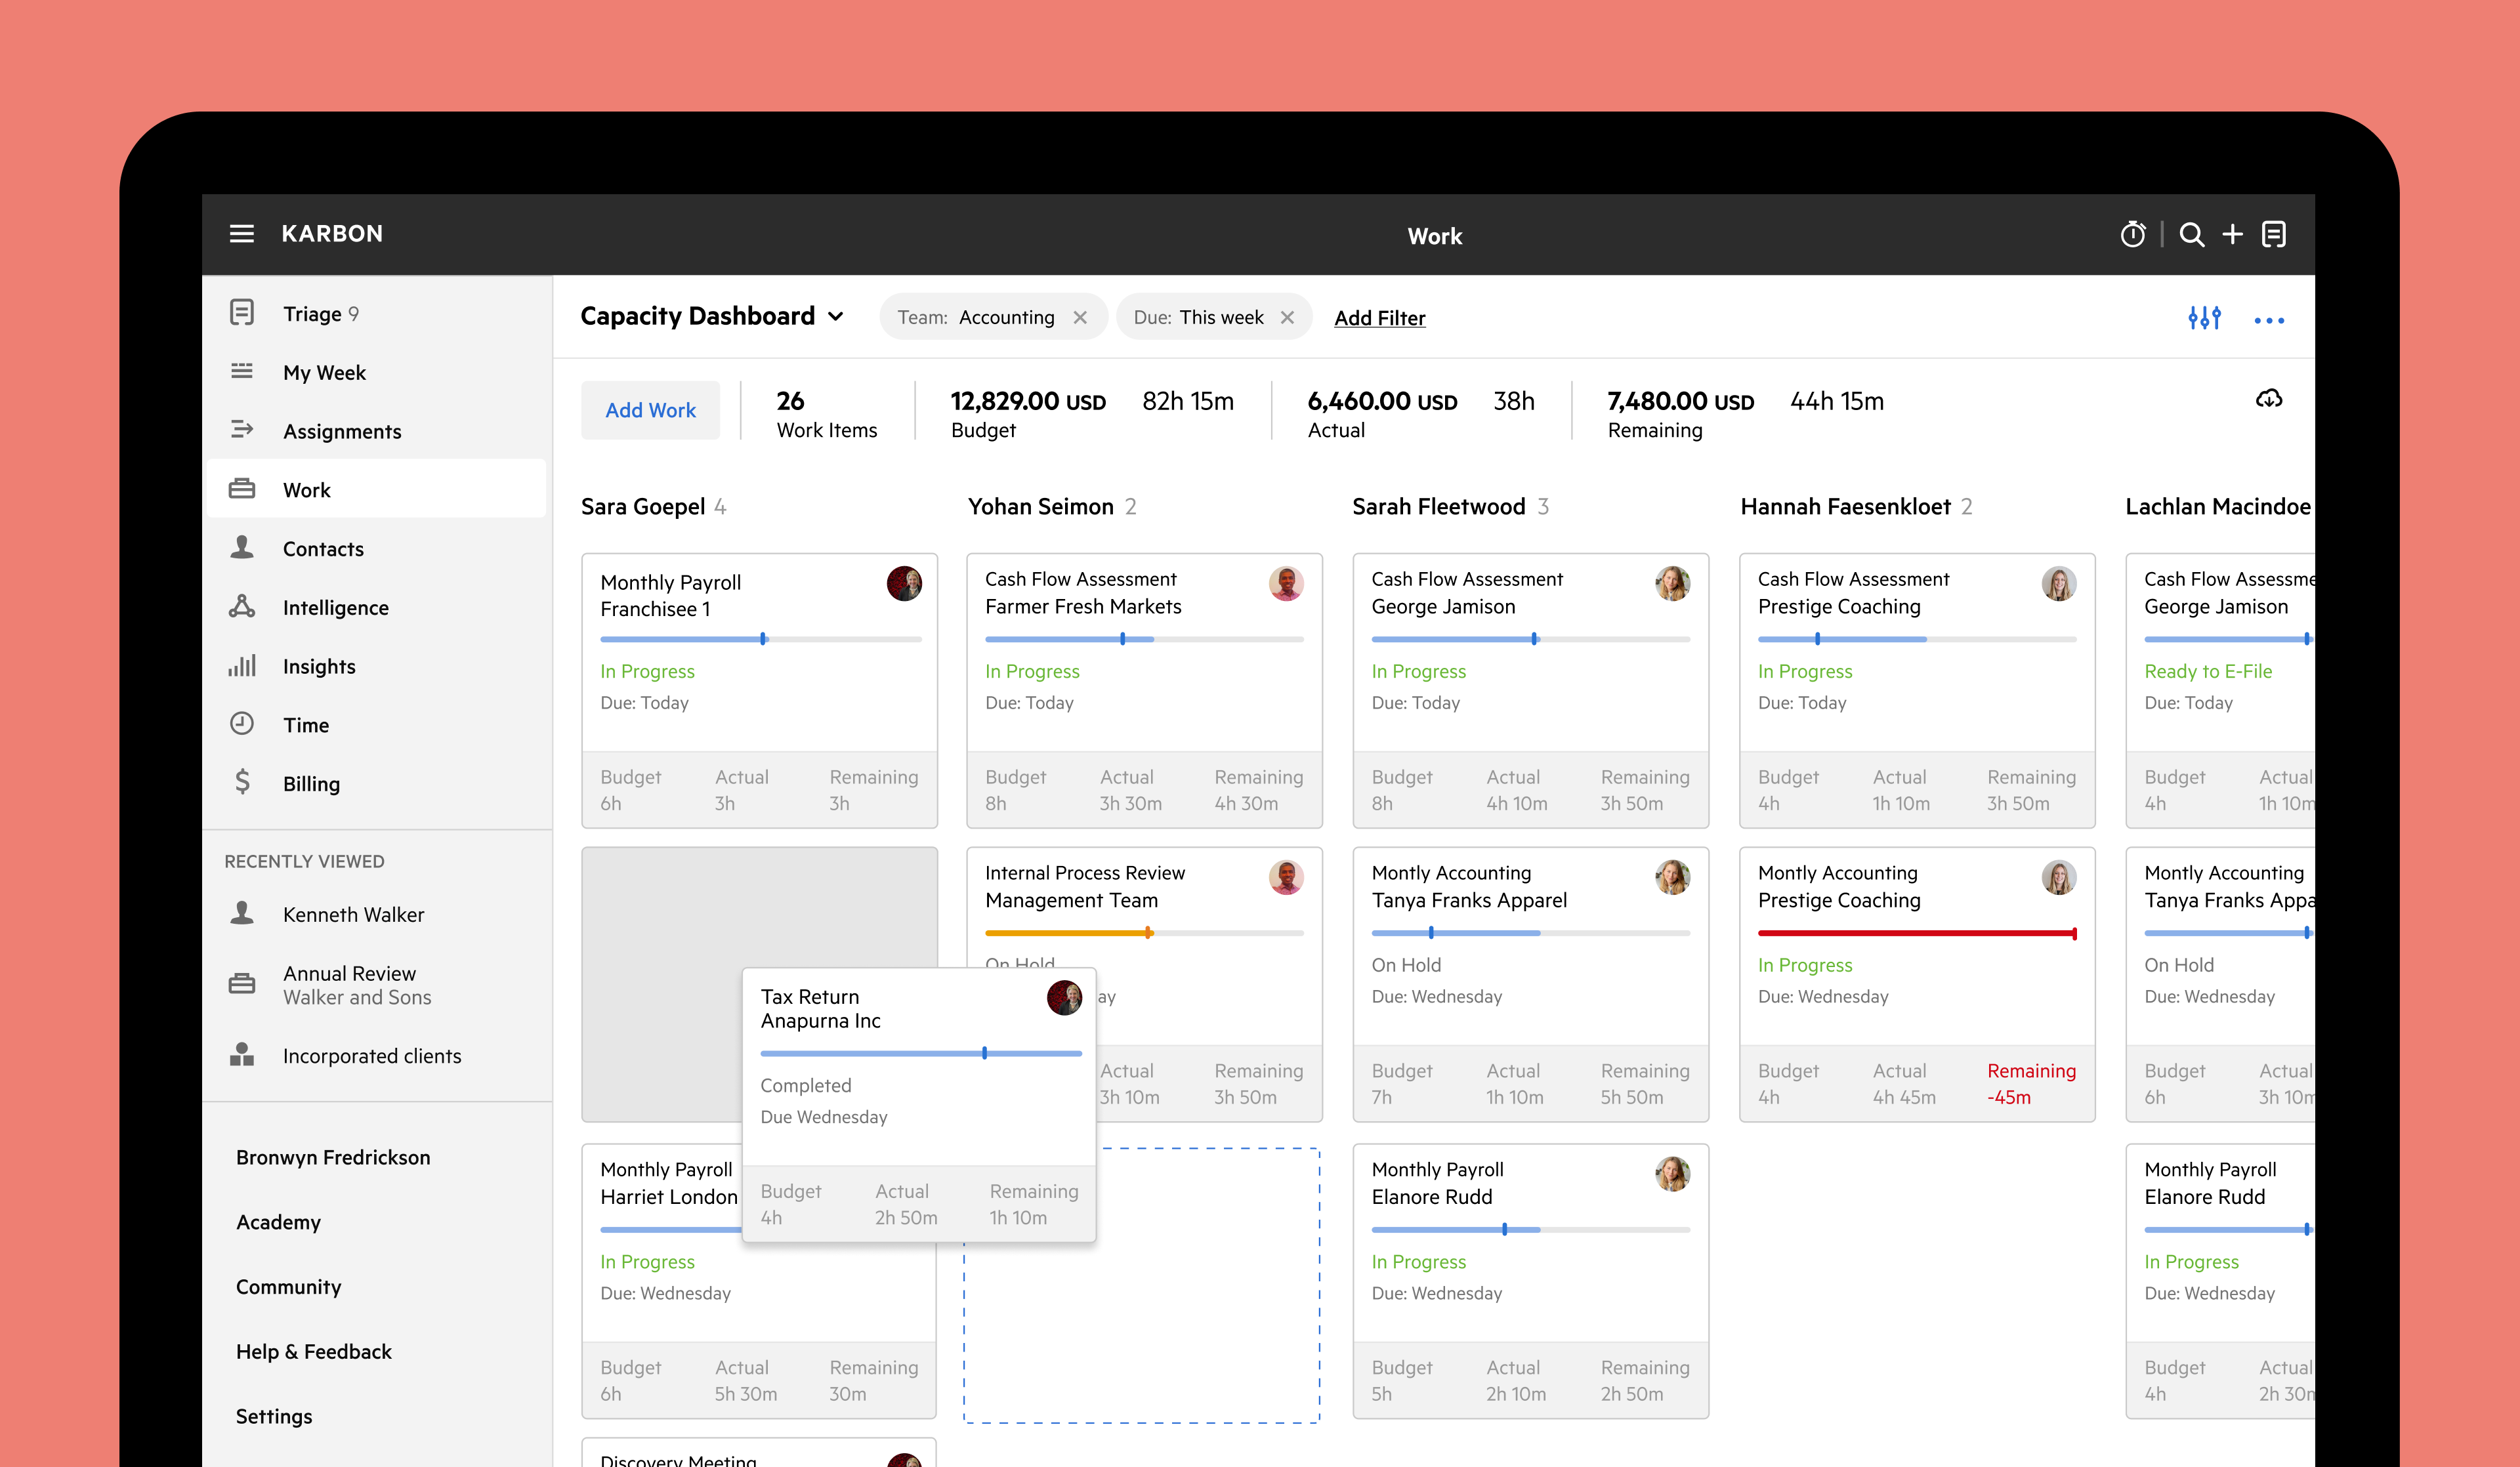 A capacity dashboard view in Karbon—an accounting practice management tool with deep project management capabilities—using the Kanban view functionality.